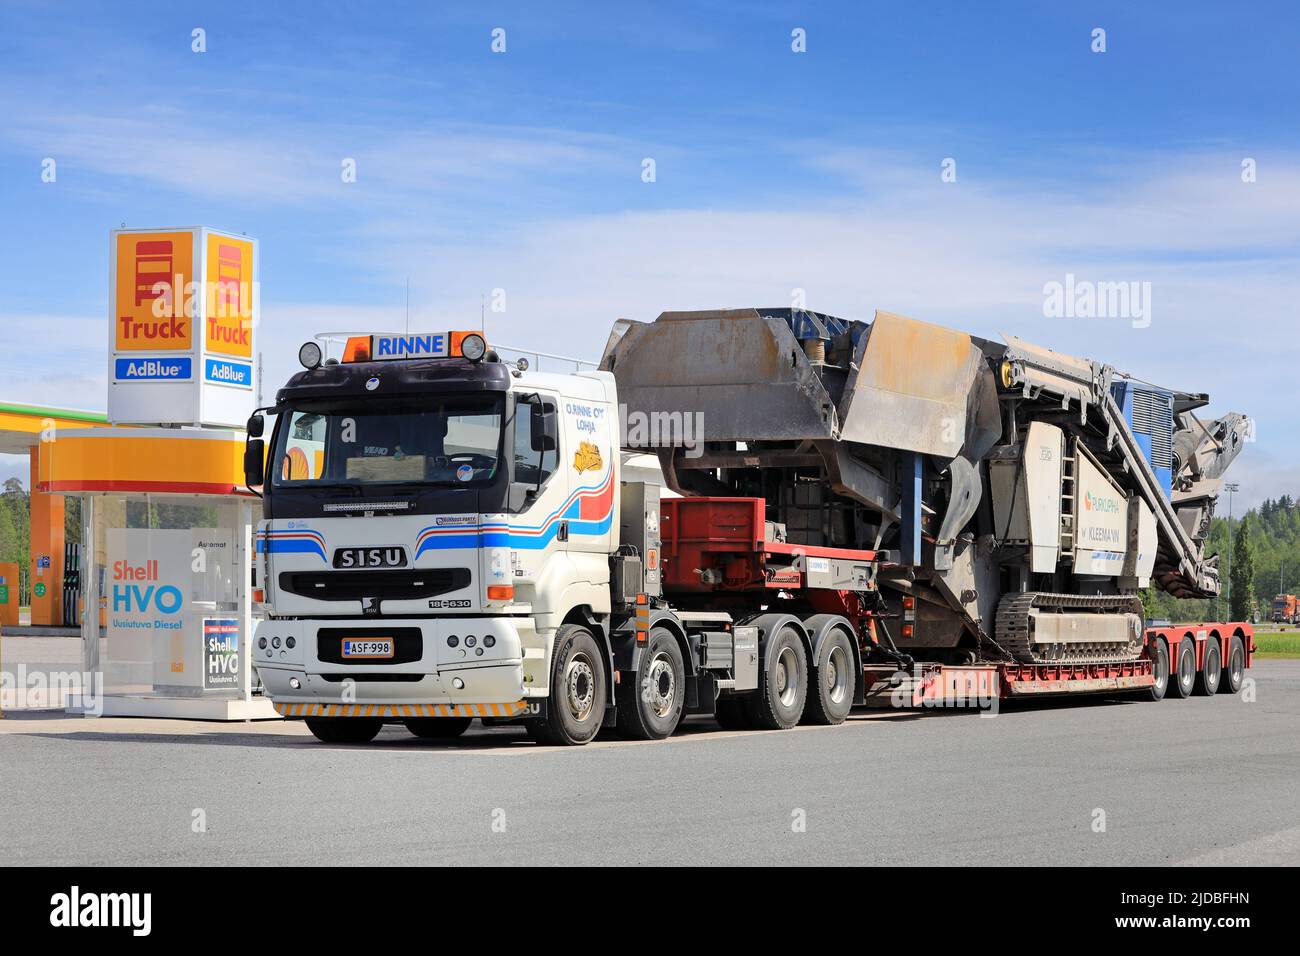 White Sisu 18E630 truck of O.Rinne Oy carrying Kleemann crusher on low loader trailer at Shell truck fueling station. Forssa, Finland. June 10, 2022 Stock Photo